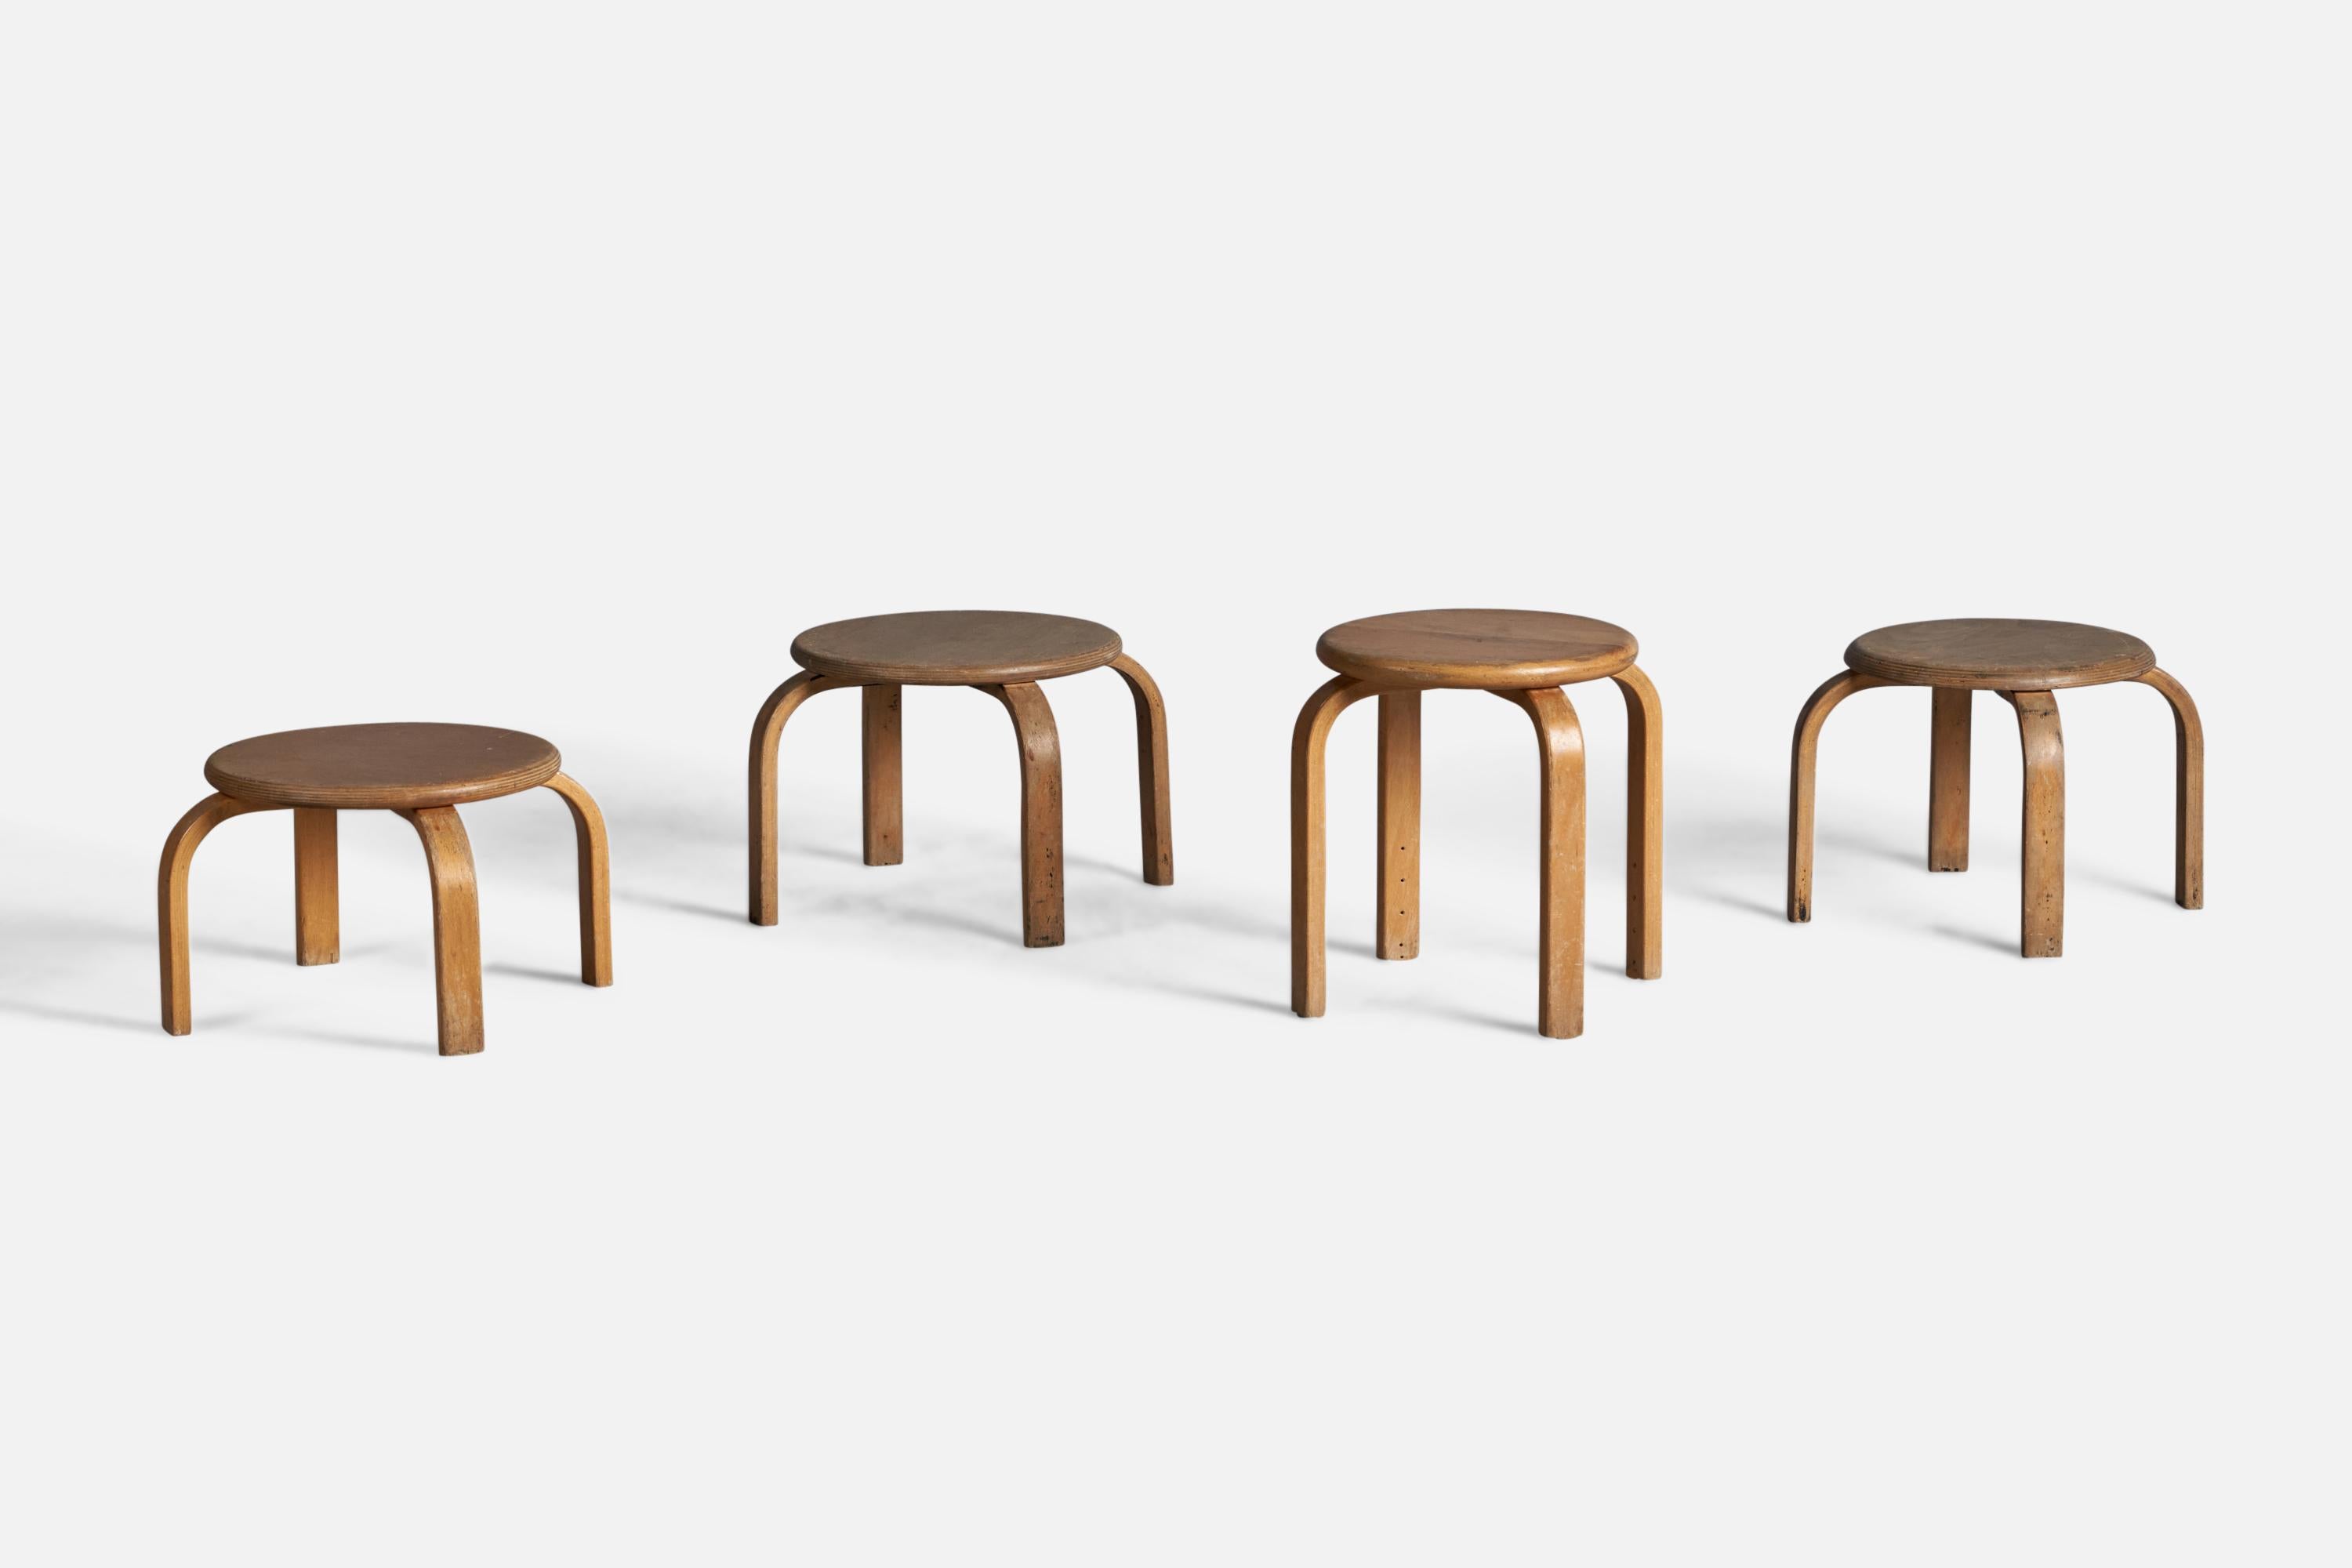 A set of 4 oak and bentwood stools, designed and produced in Denmark, c. 1940s.

Dimensions of Each Stool:
14.75